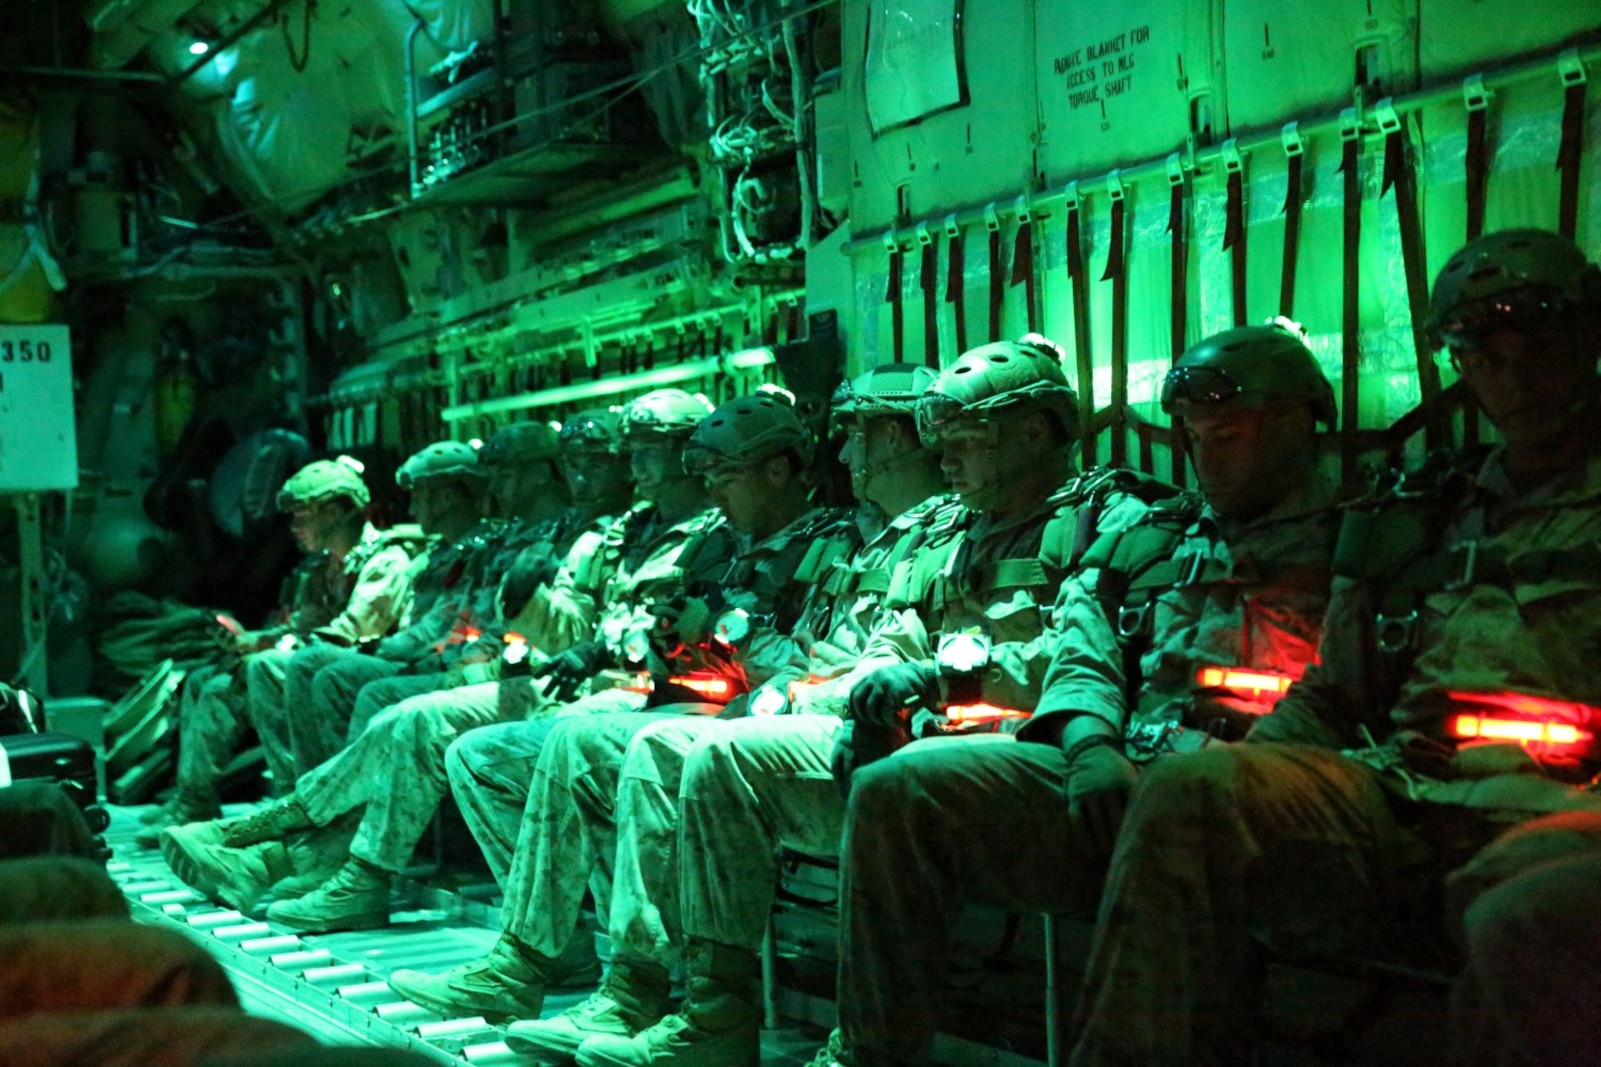 Marines with Bravo Company, 1st Reconnaissance Battalion, sit in a C-130 Hercules waiting for the command to parachute out of the plane during a double-bag static line course held in Parker, Ariz., March 24, 2014. A static line is a cord attached from one end of the aircraft to the other. When the Marine jumps from the plane, the line pulls the deployment bag out of the pack on the Marine’s back causing the parachute to inflate. The 24 Marines taking the course were evaluated on their jump form, their formation in the air and their landing. They conducted both day and night jumps and were required to jump a total of 12 times before they passed the course. (Photo by Lance Cpl. Christopher J. Moore/Released)